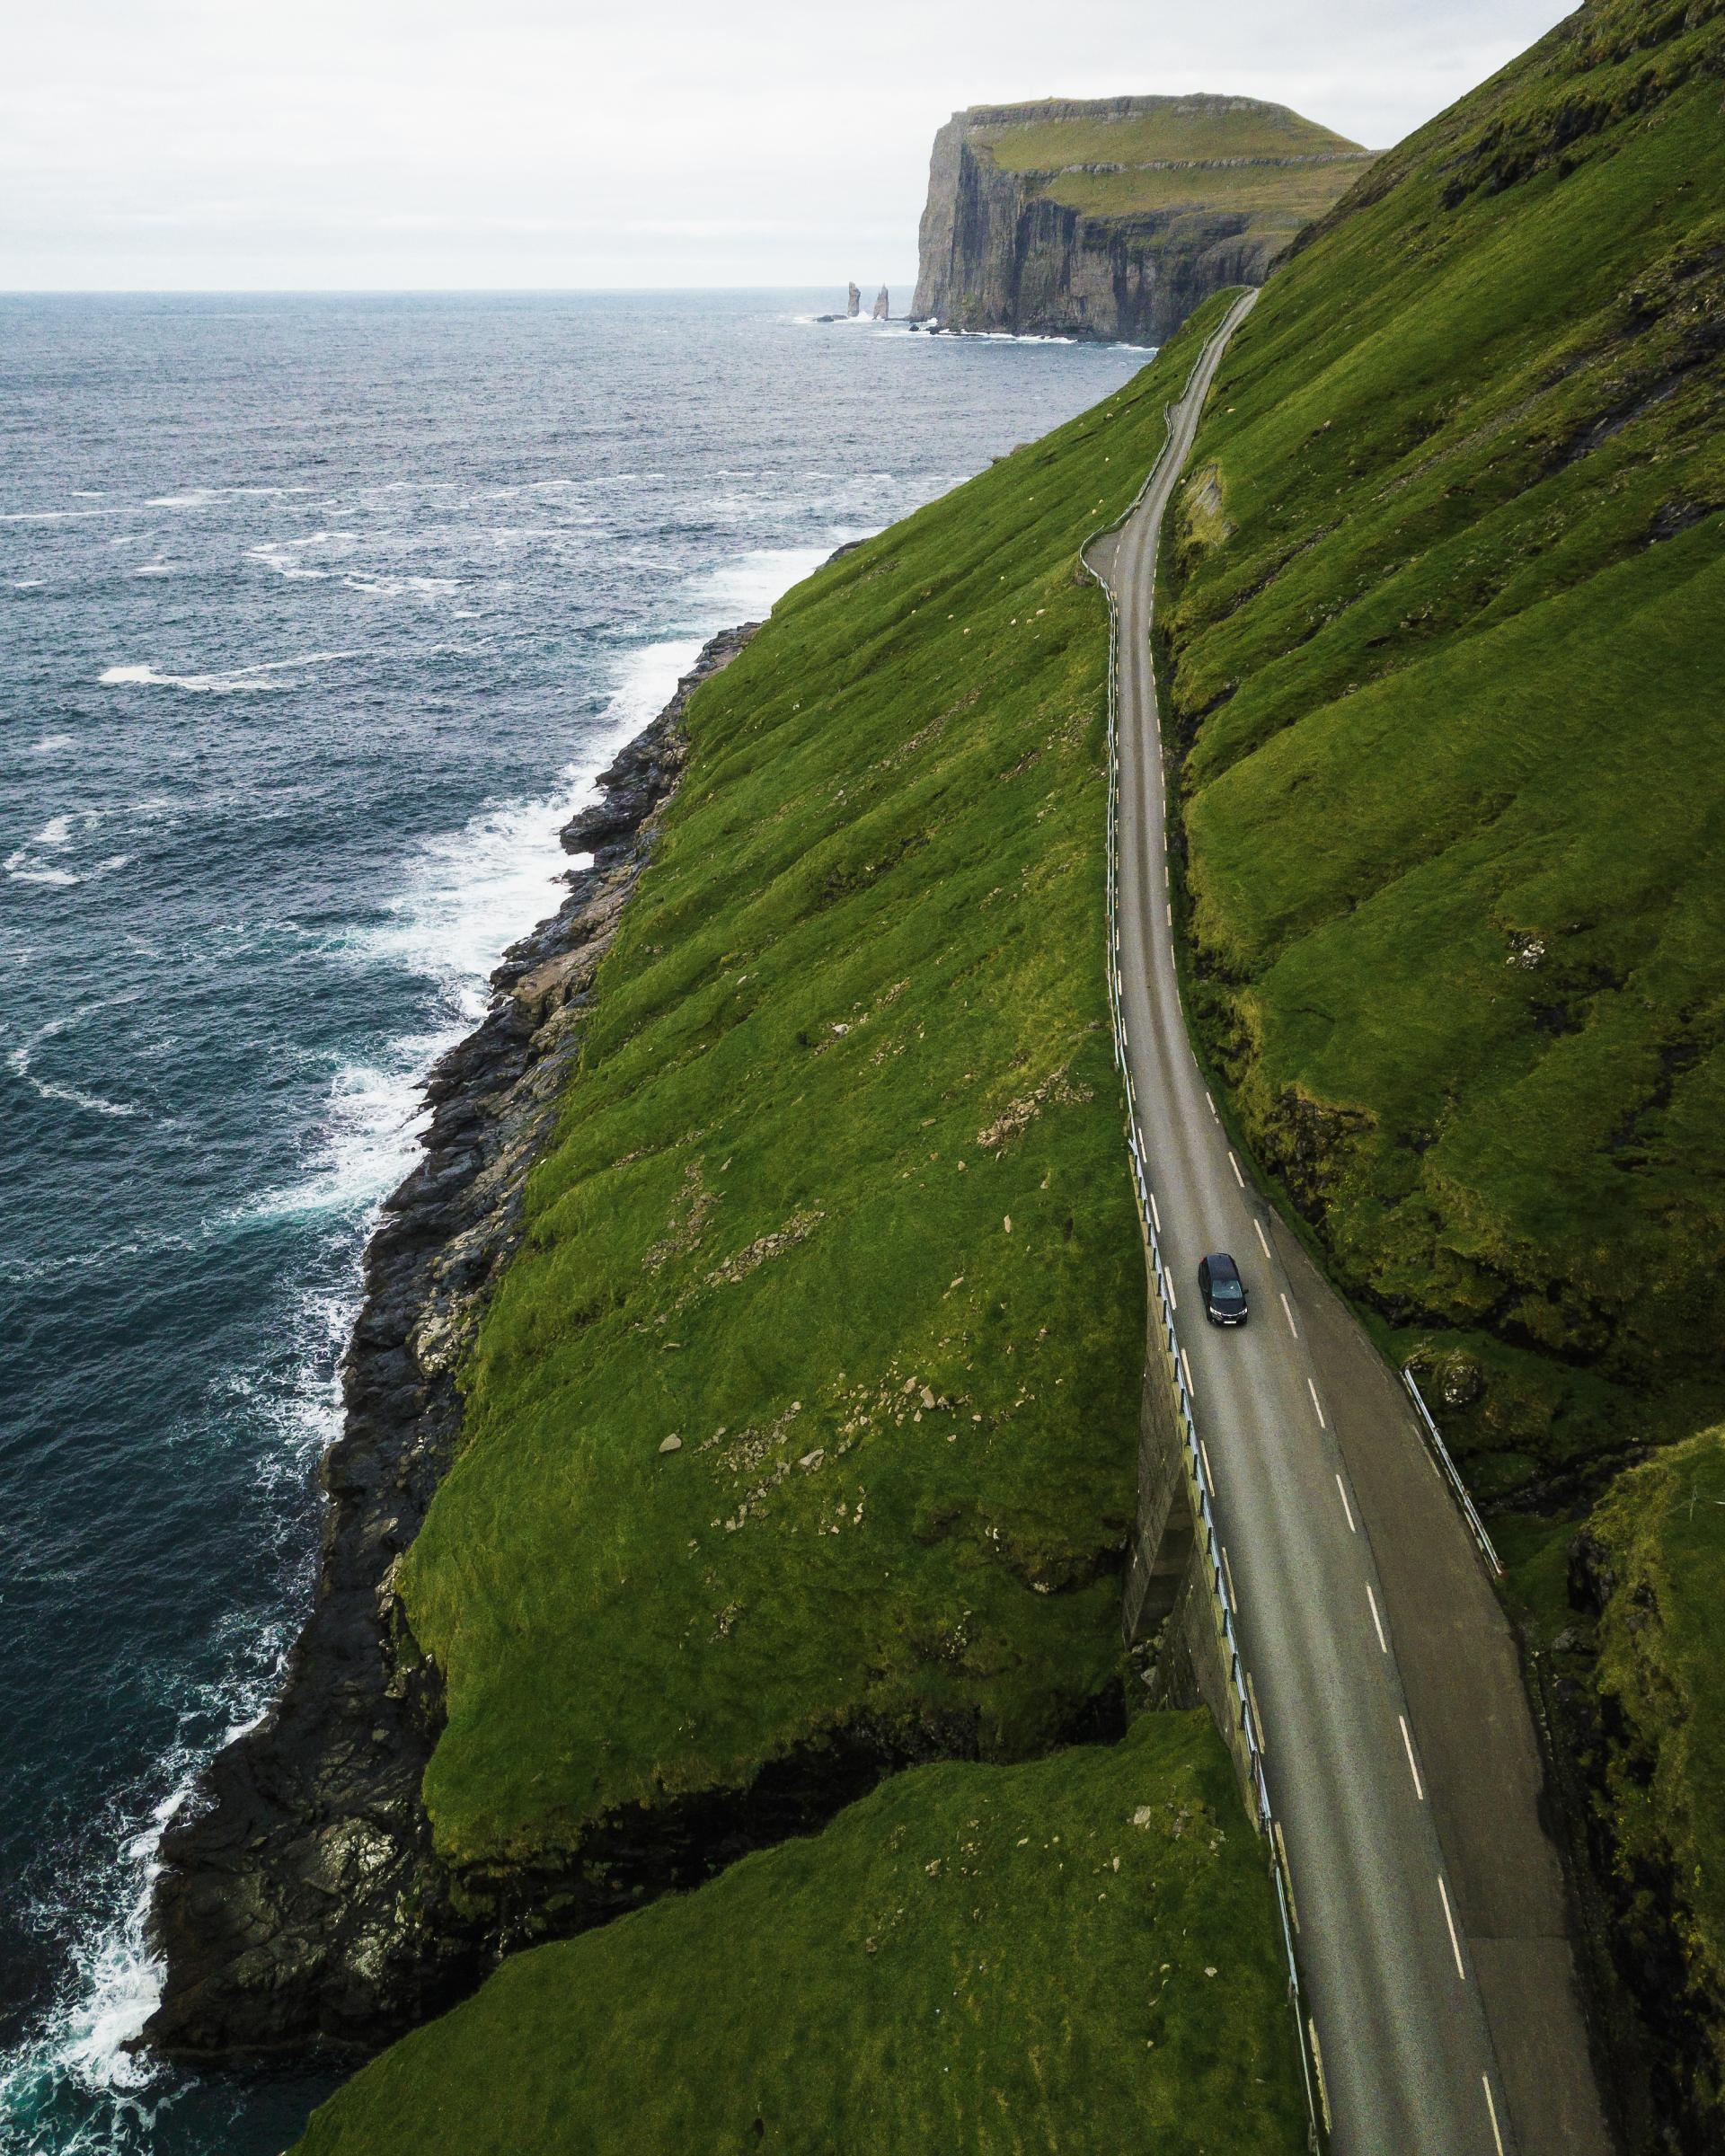 Thumbnail of - Car driving towards Tjørnuvík in the Faroe Islands. Stunning scenery from above of the shores 6 green hills. Taken by Saviour Mifsud